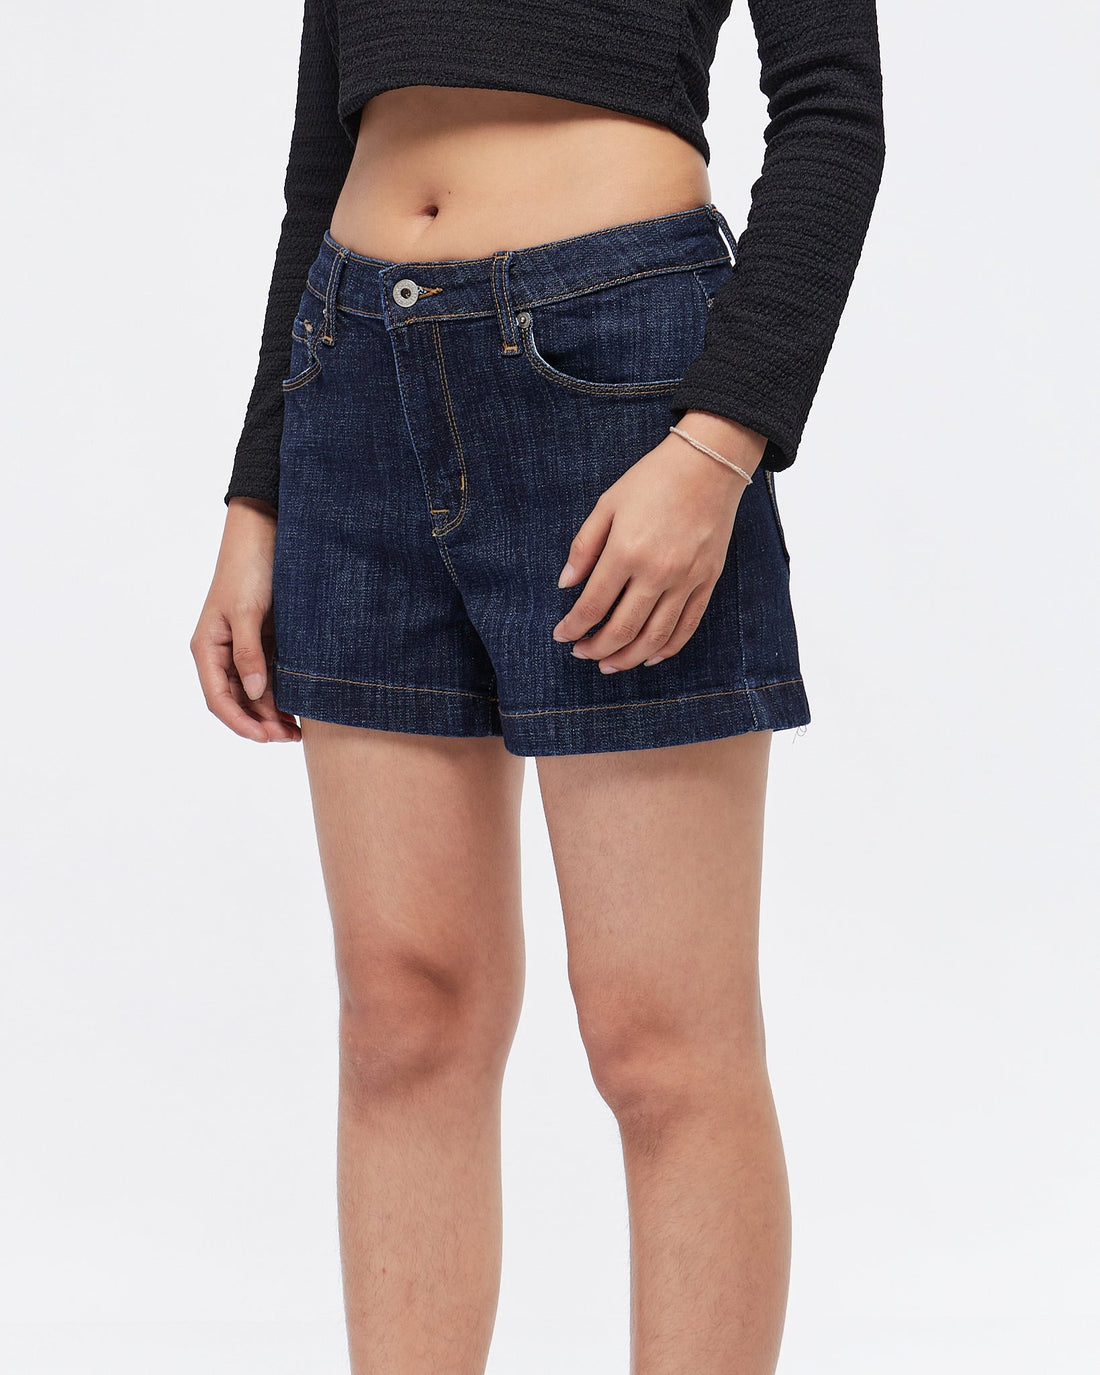 MOI OUTFIT-High Waist Lady Short Jeans 14.50